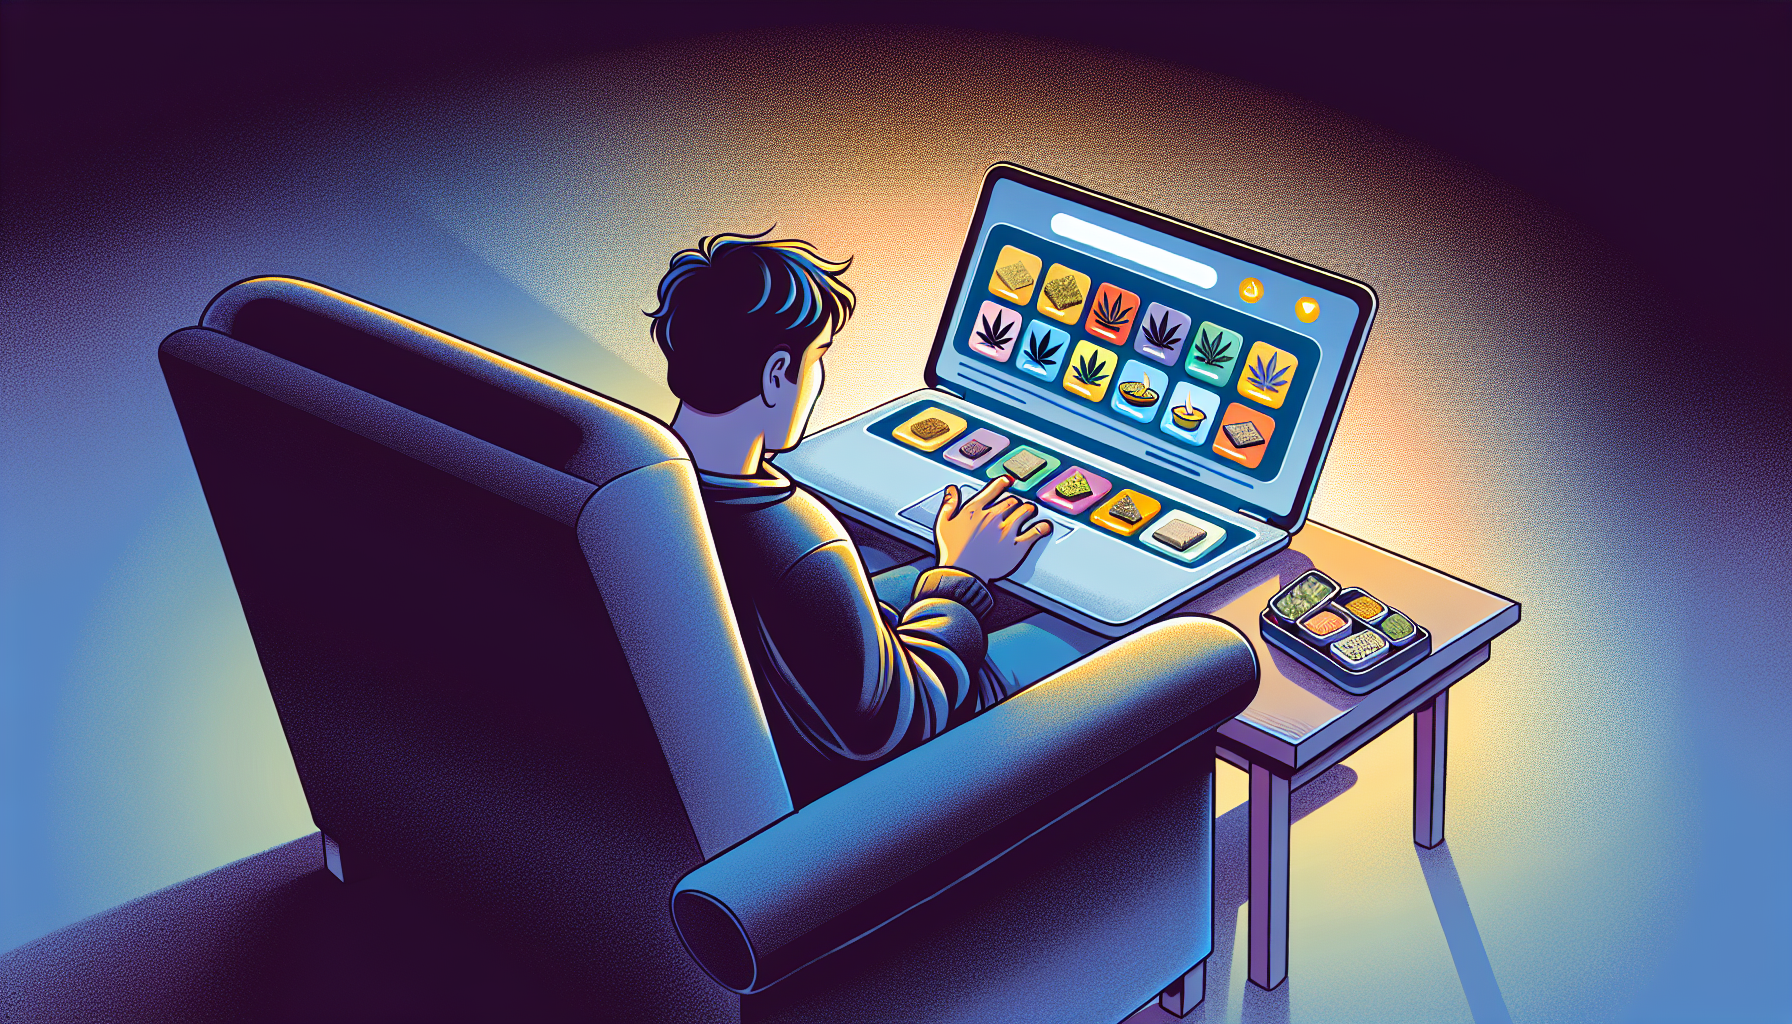 Illustration of a person browsing hash products on a laptop